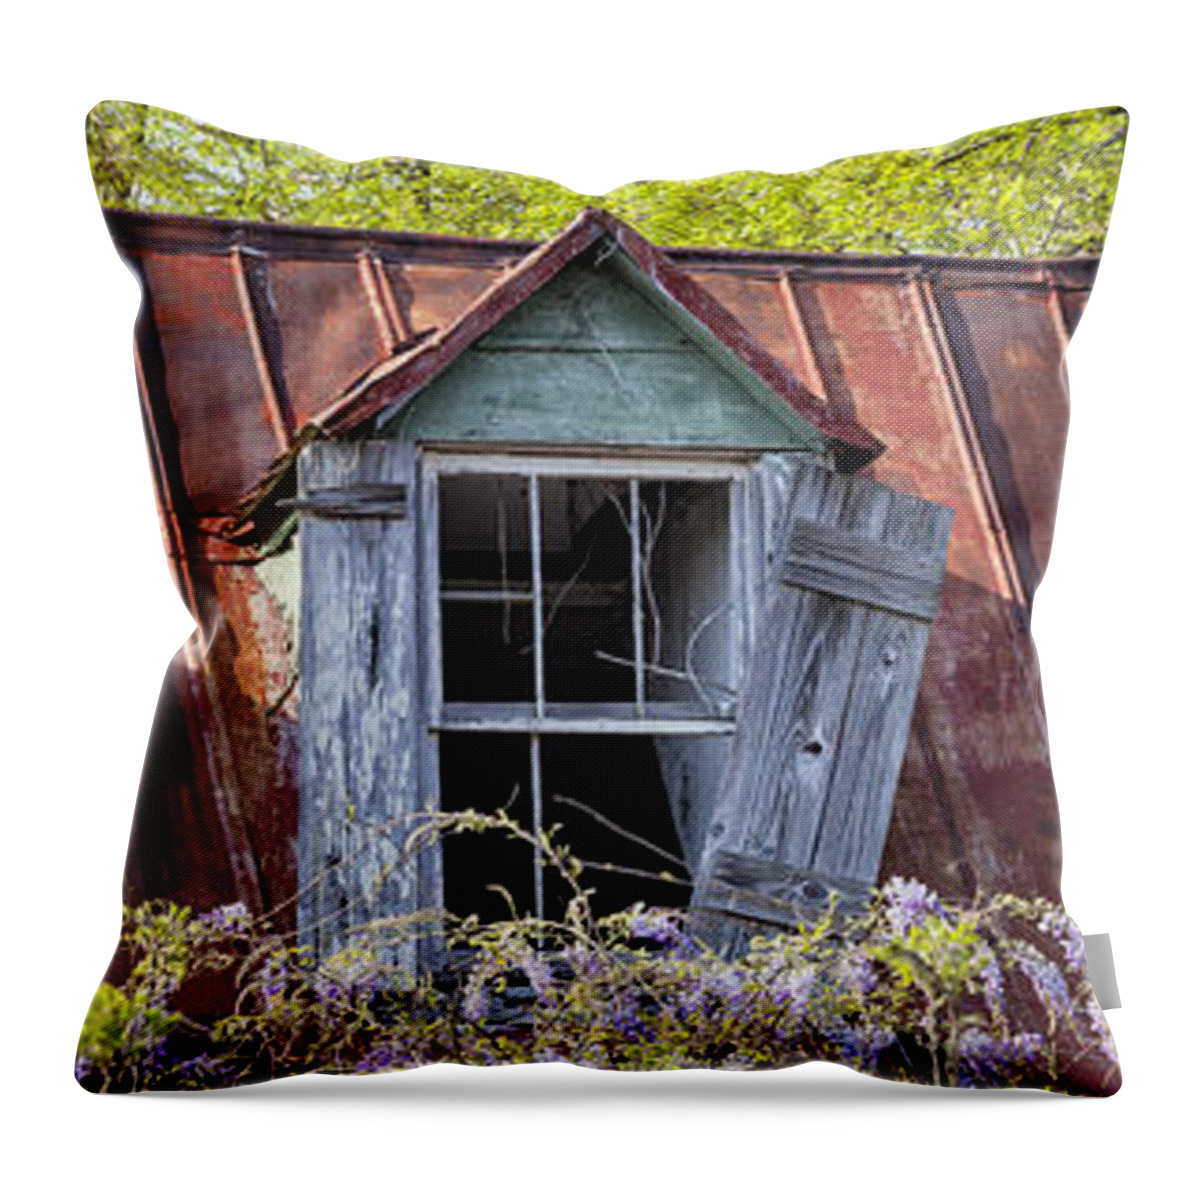 Window Throw Pillow featuring the photograph Triptych Windows by Denise Bush